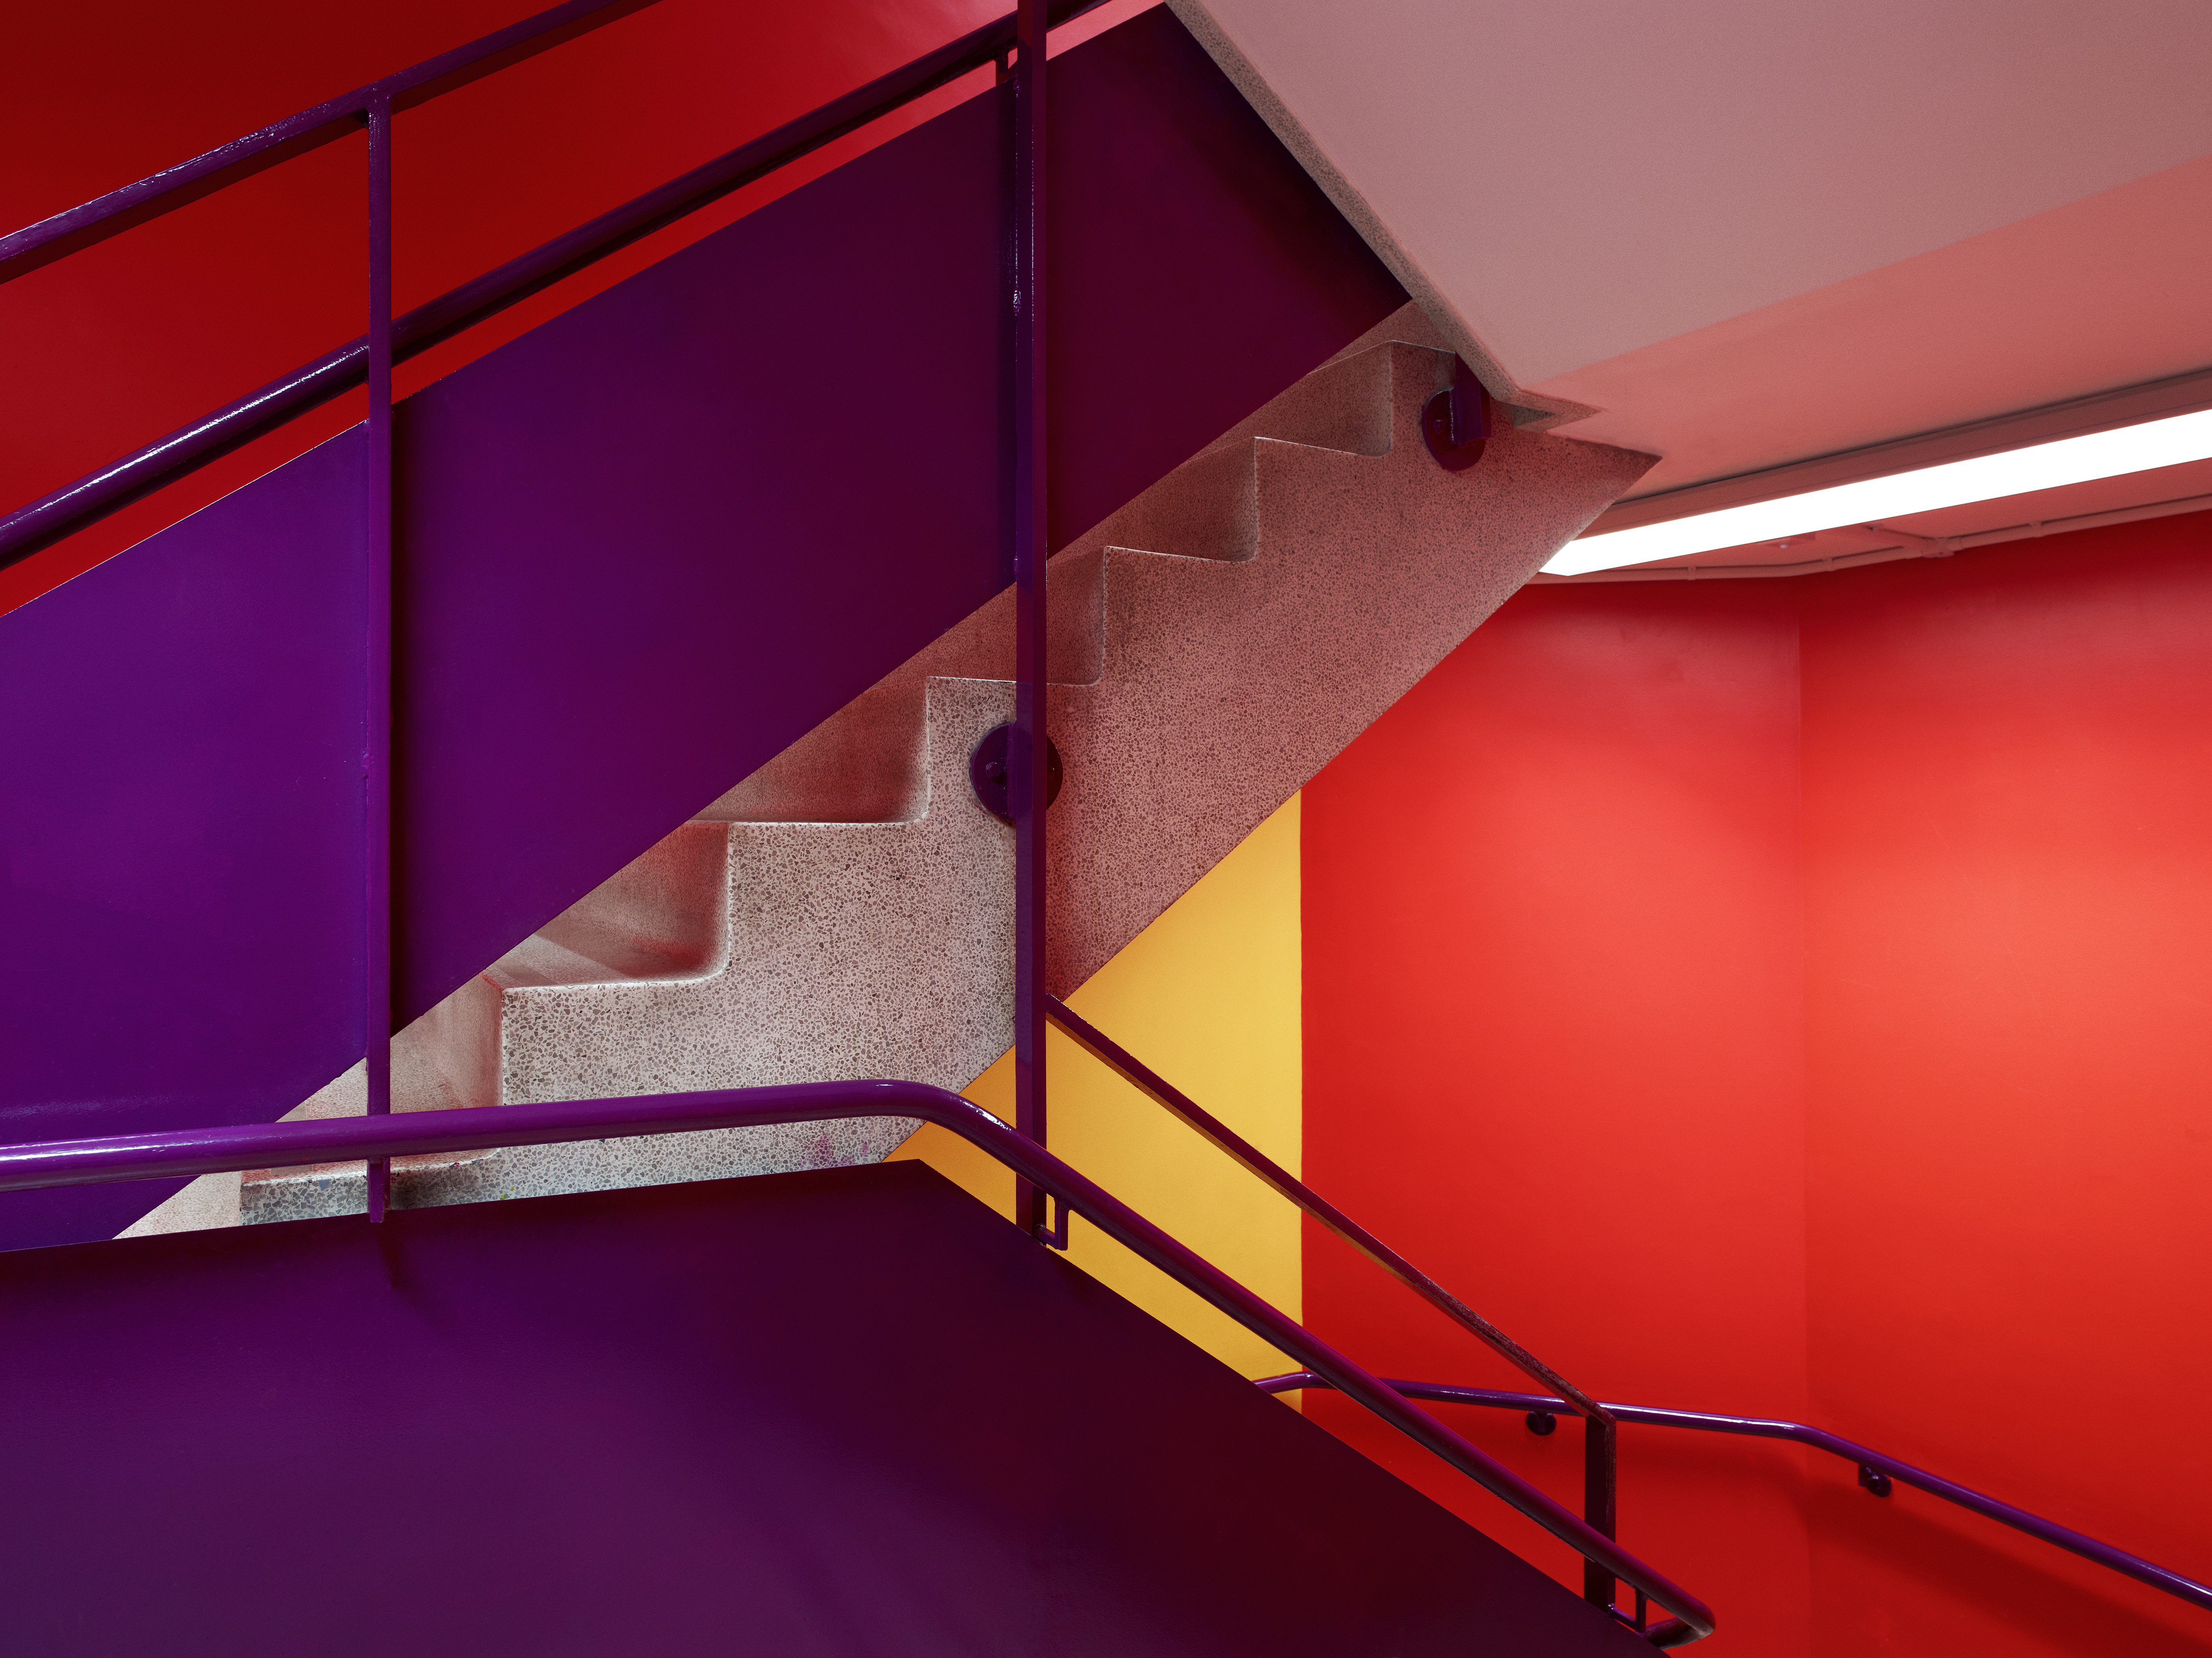 General 5464x4096 colorful stairs handrail red purple indoors